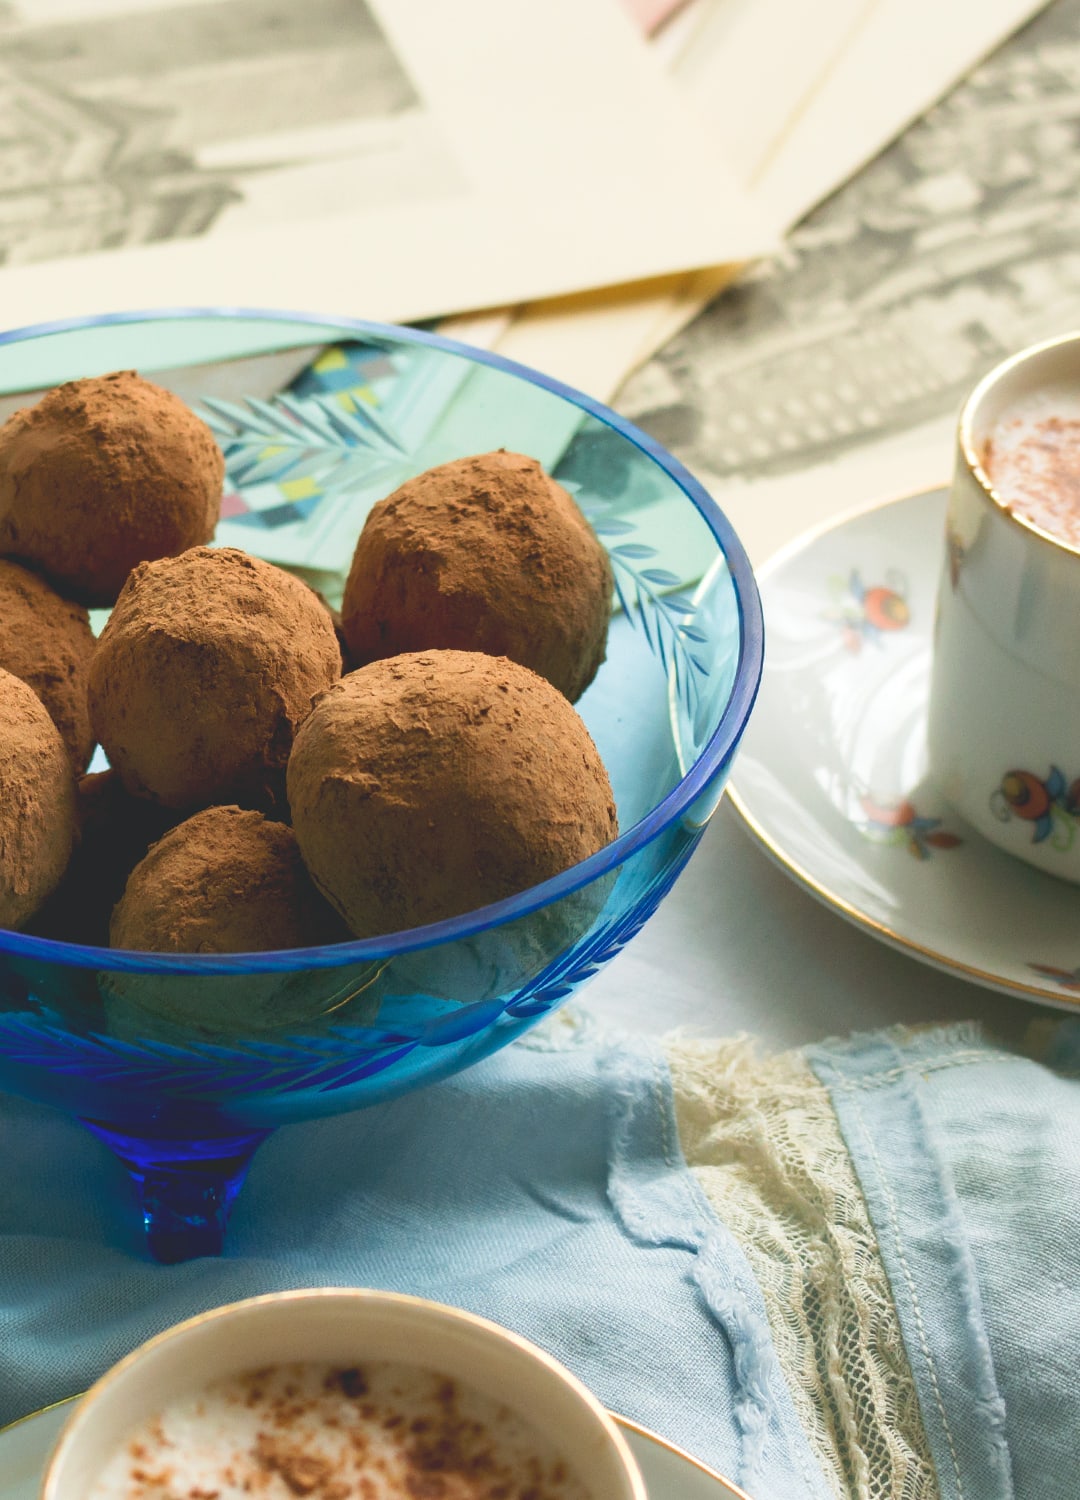 Chocolate Truffles - sweet and chocolatey, these truffles are the perfect dessert or snack when you're craving something sweet. Great way to use up leftover pulp from making coconut milk! | thehealthfulideas.com